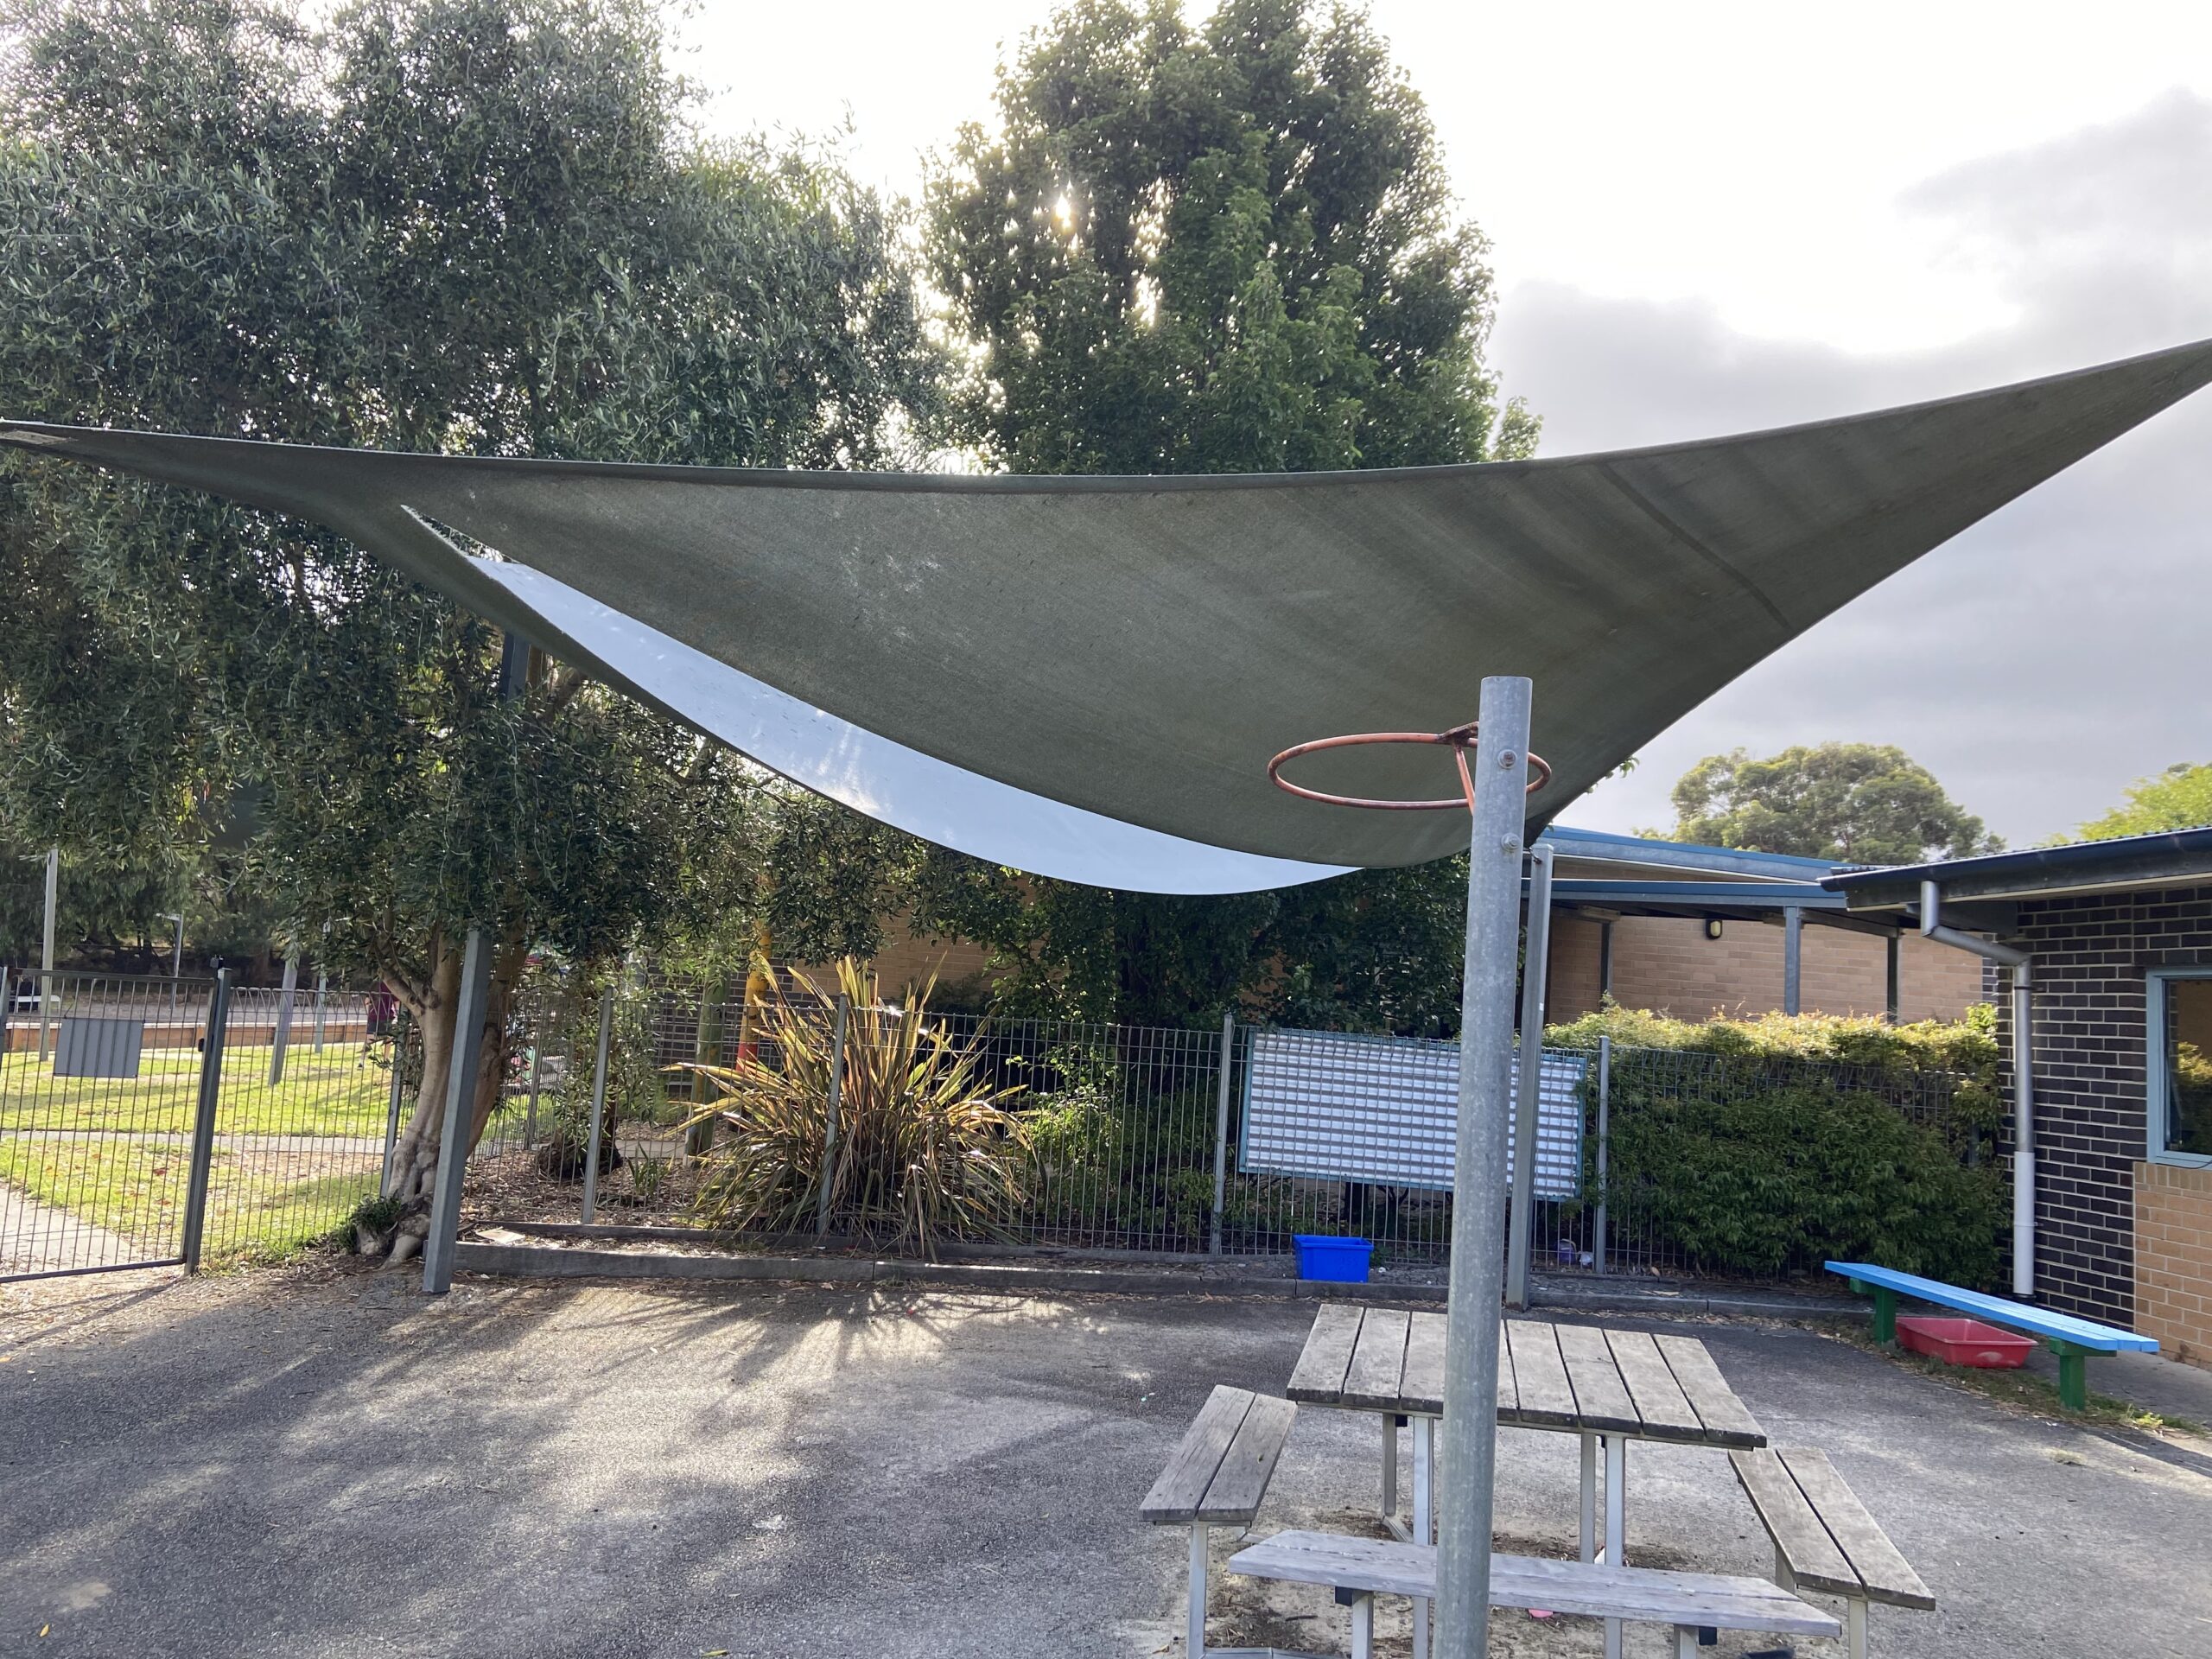 Damage shade sail that needs repairs or replacement 